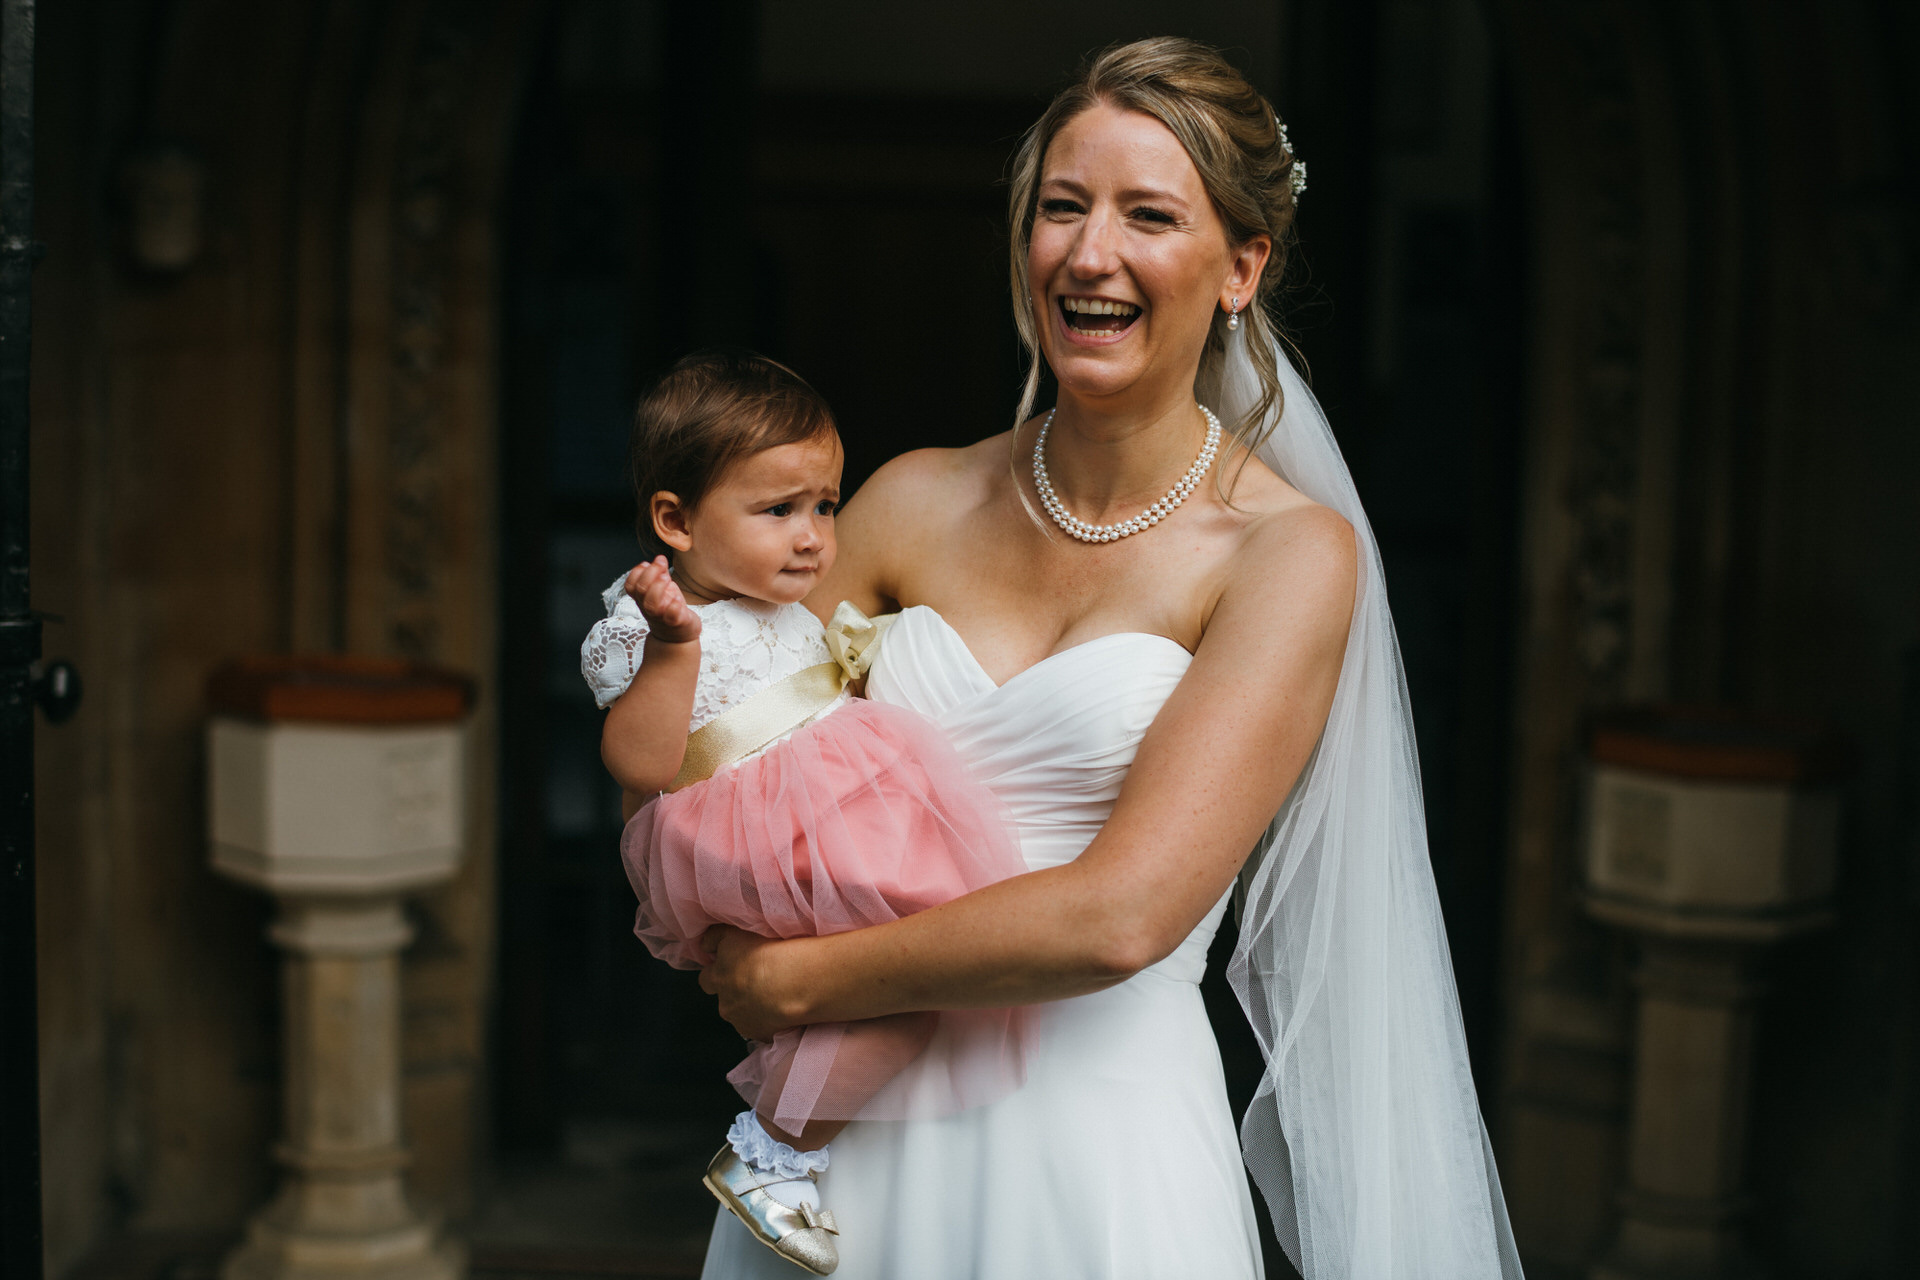 Bride and baby 